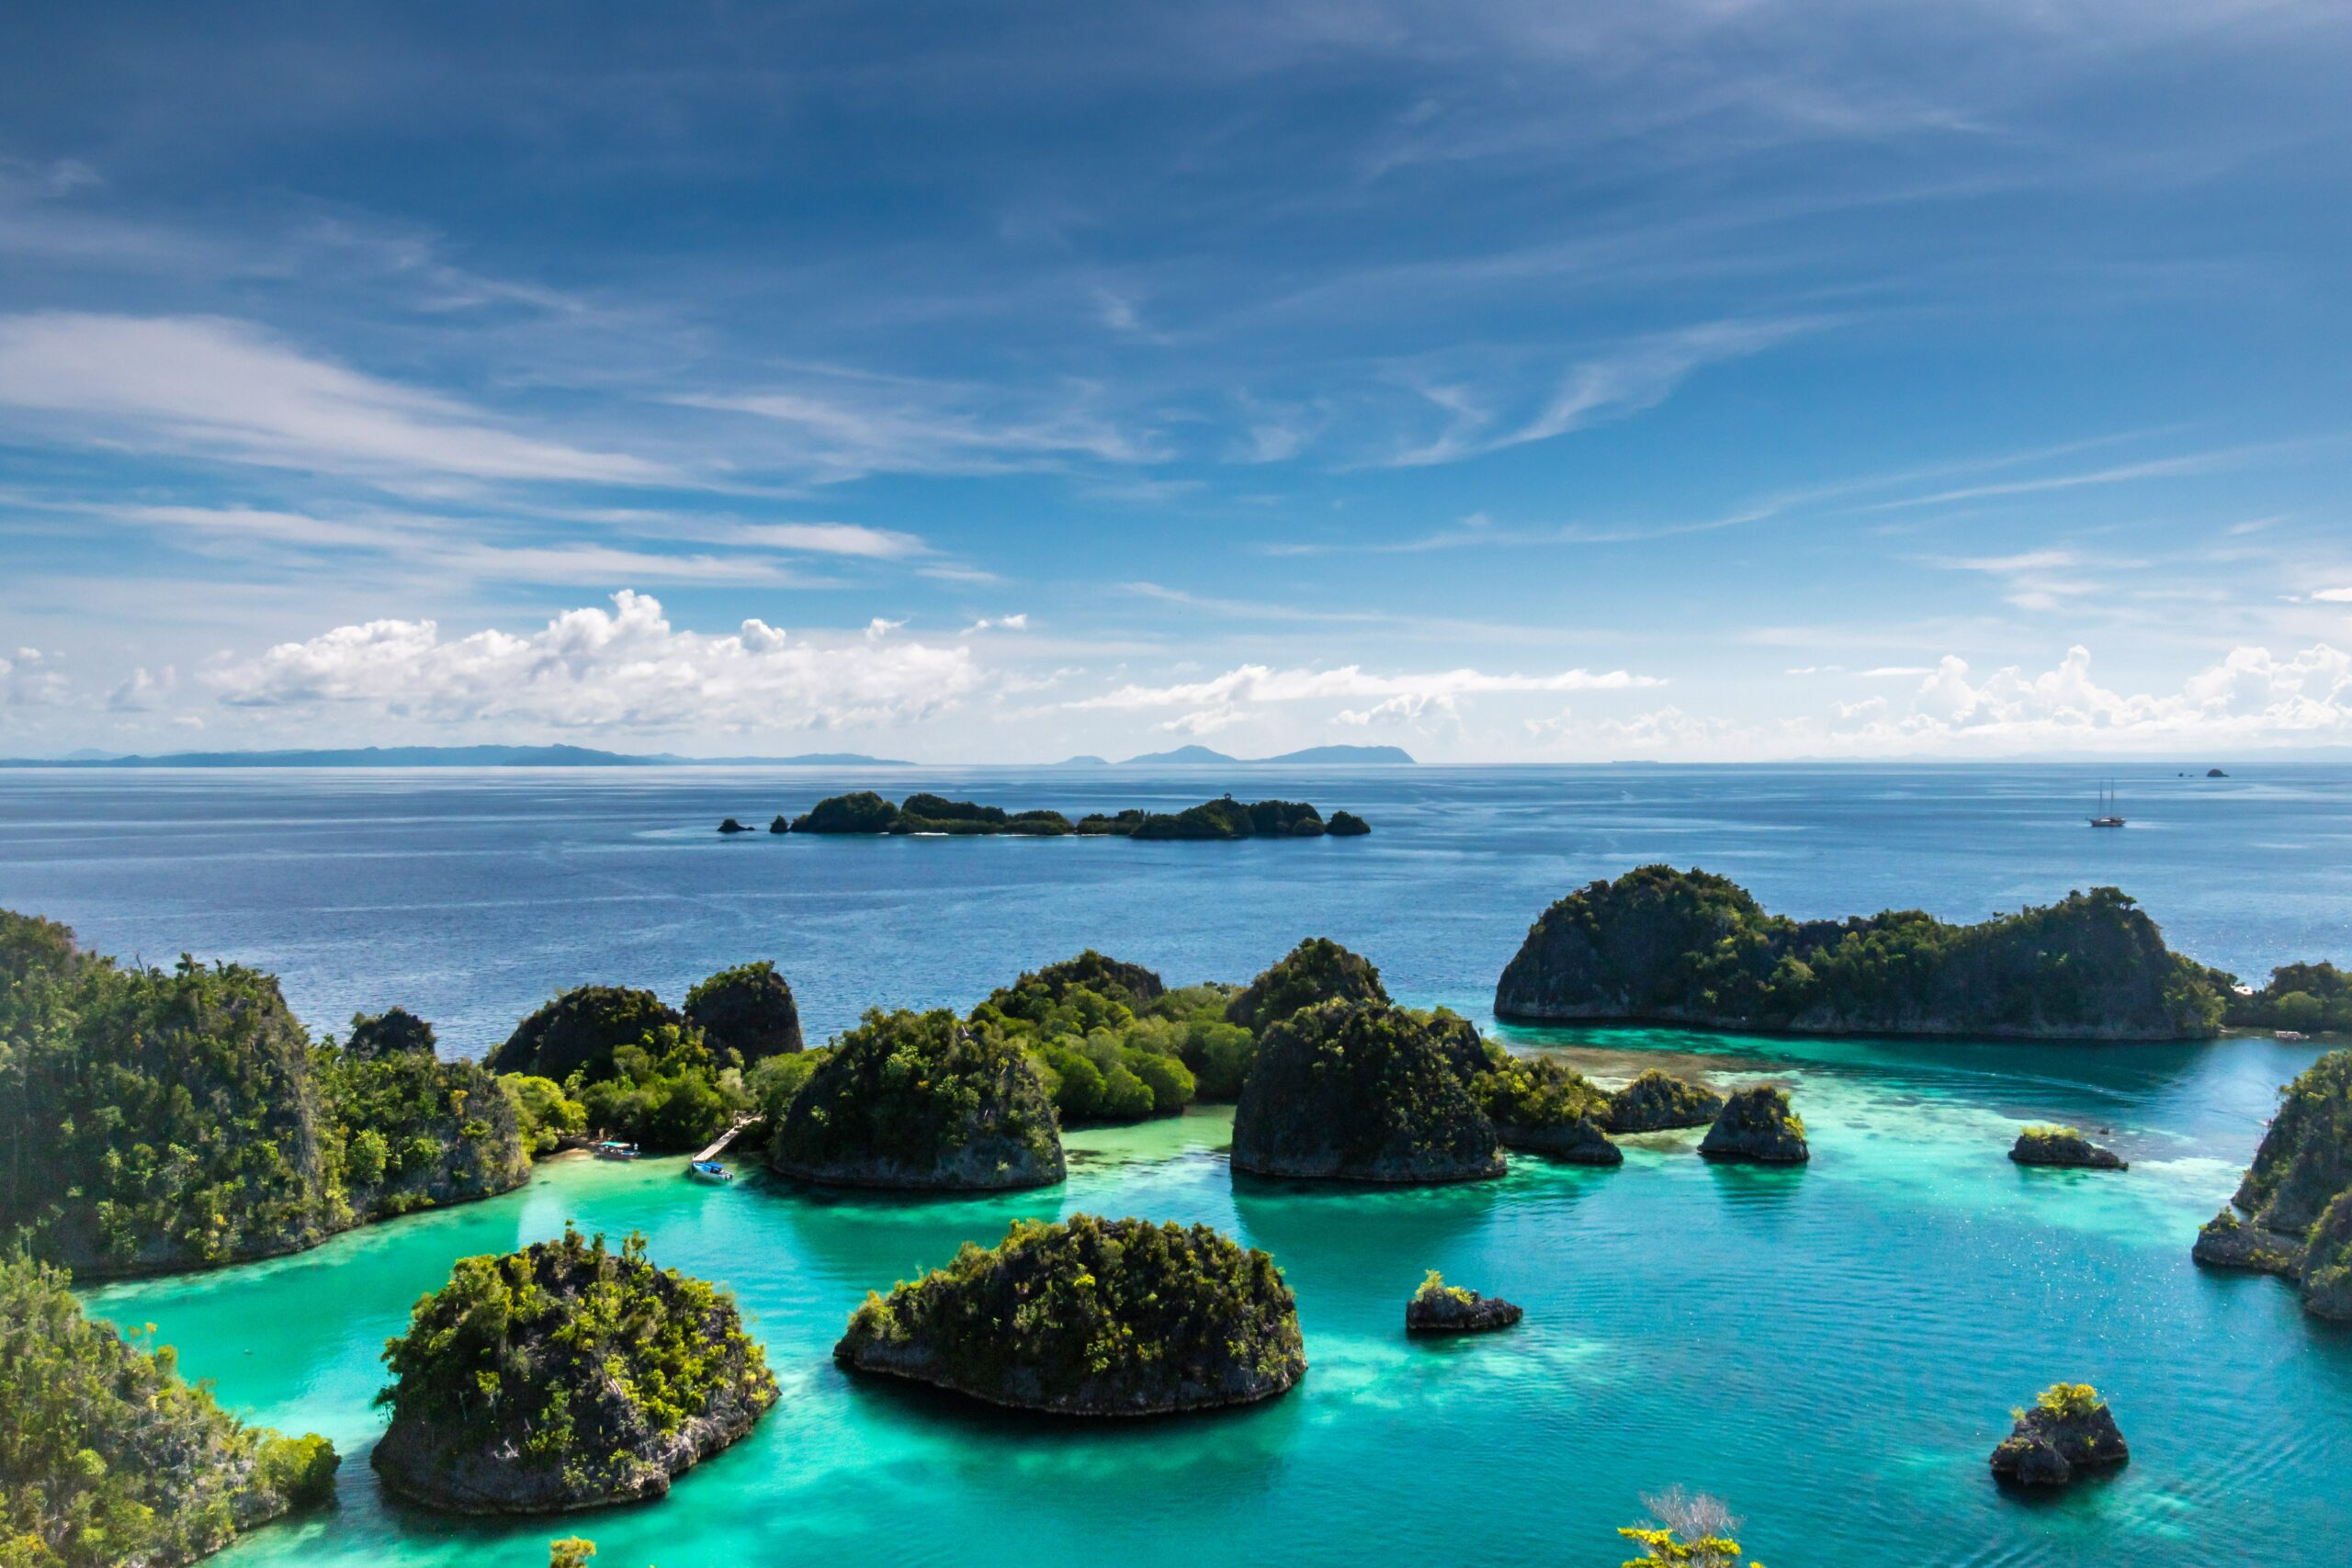 A view of islands with trees and blue water at Raja Ampat landmark in Indonesia.